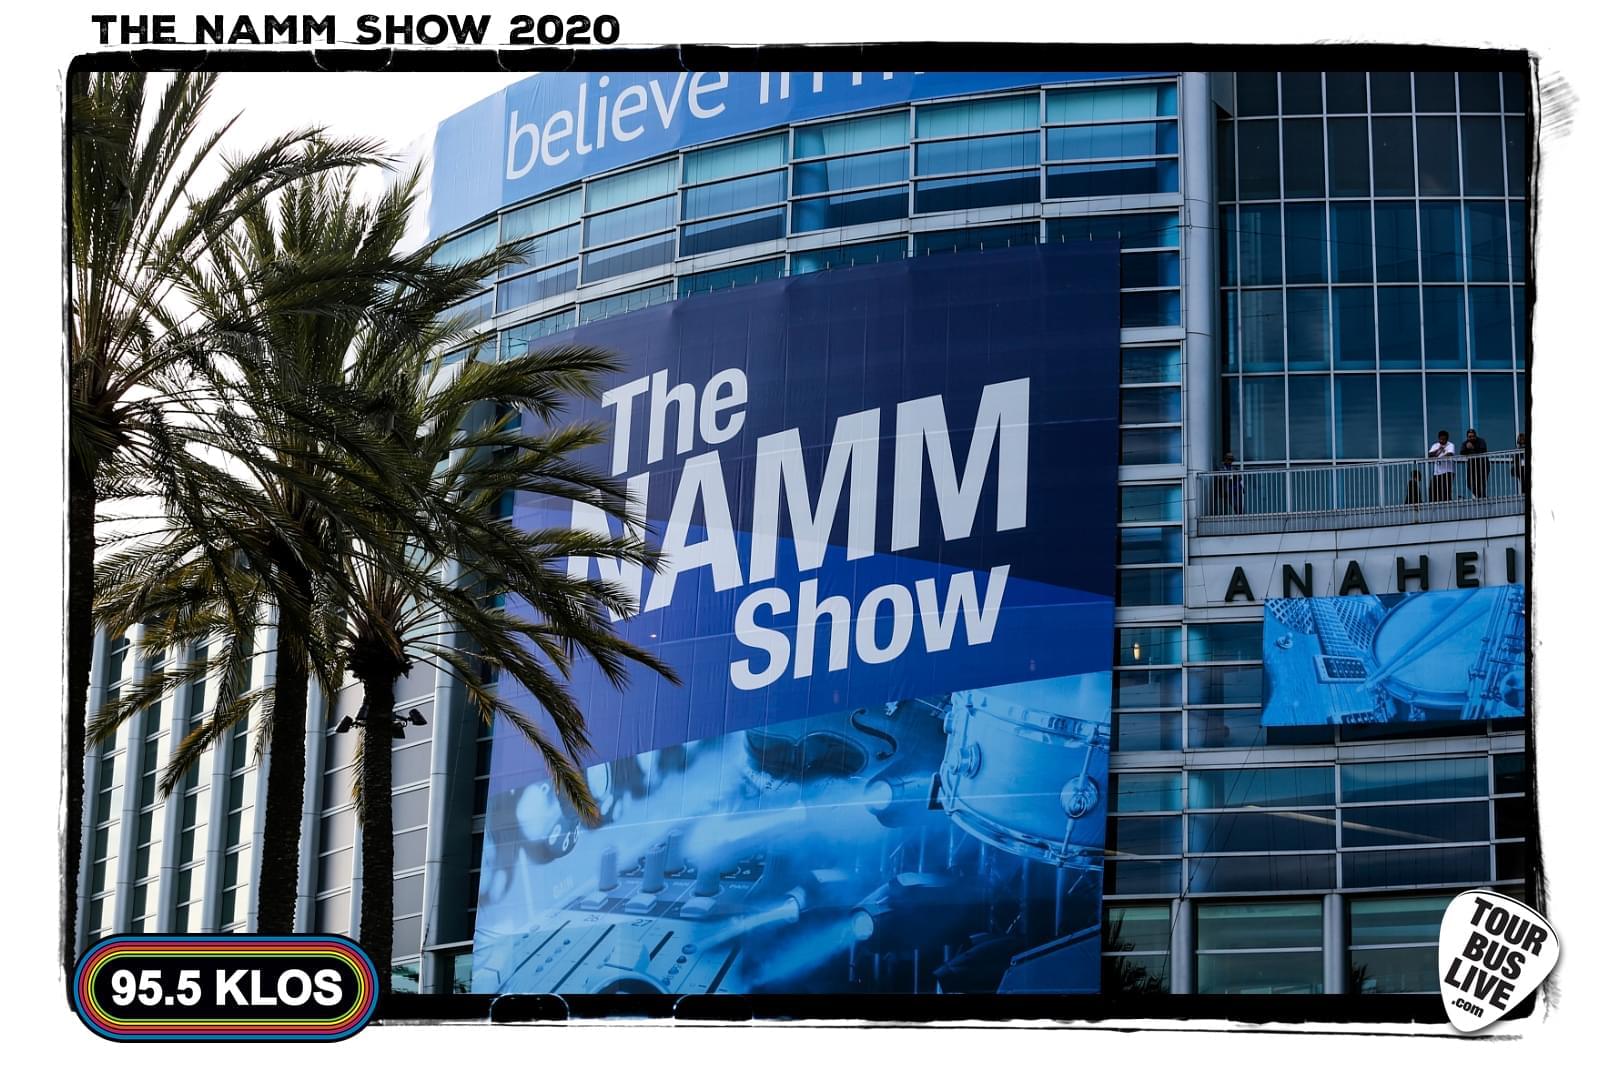 2021 NAMM Show Cancelled Due to COVID-19